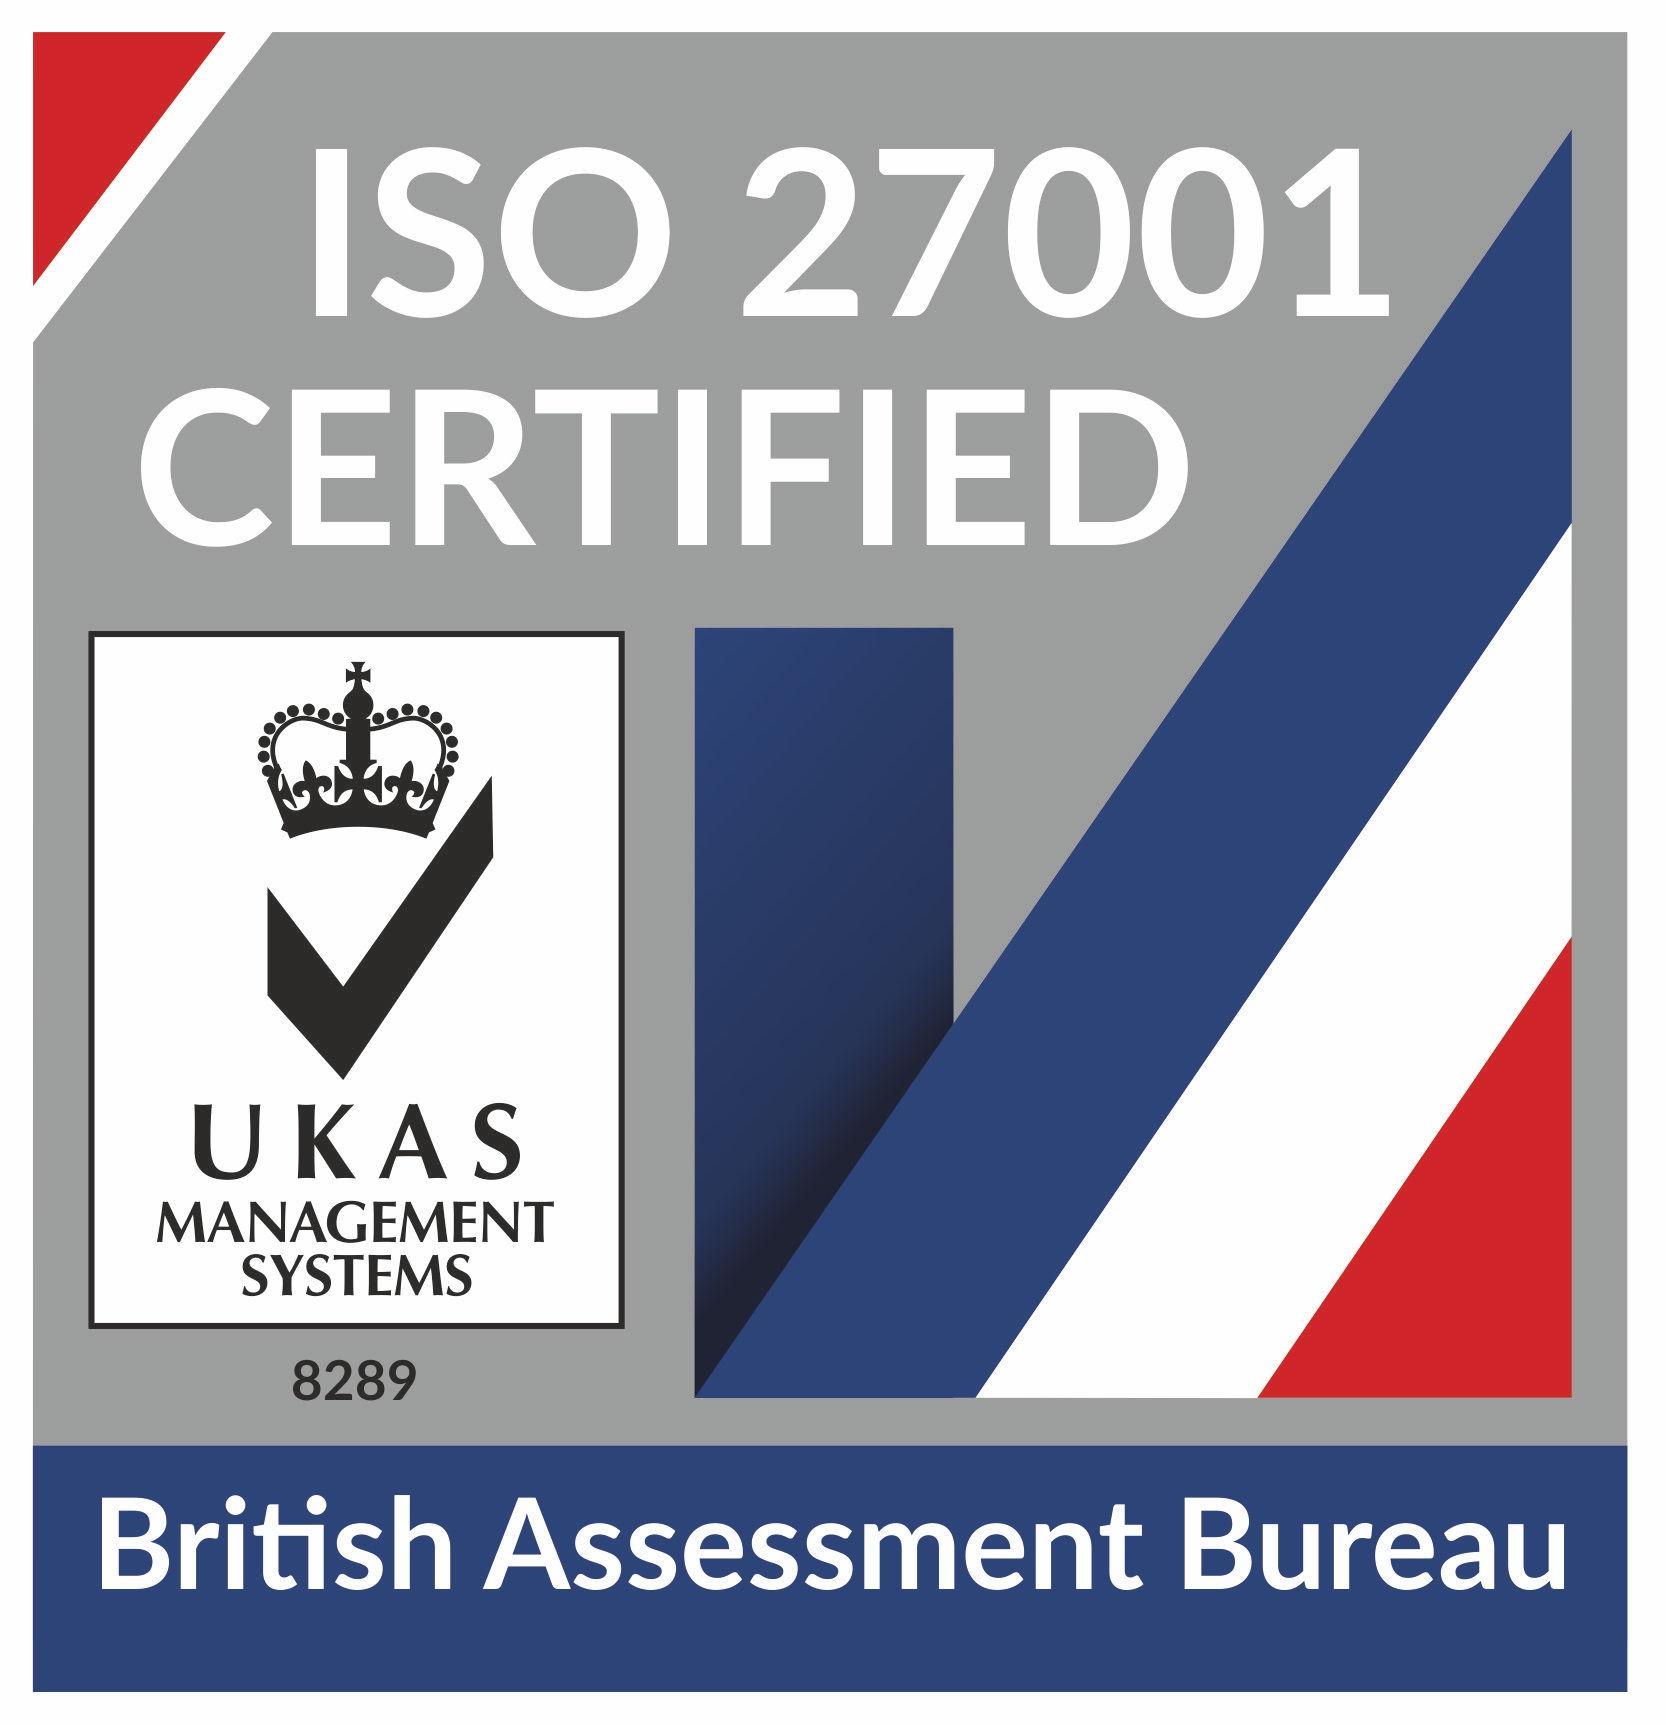 ISO 27001 Standard for Information Security Management